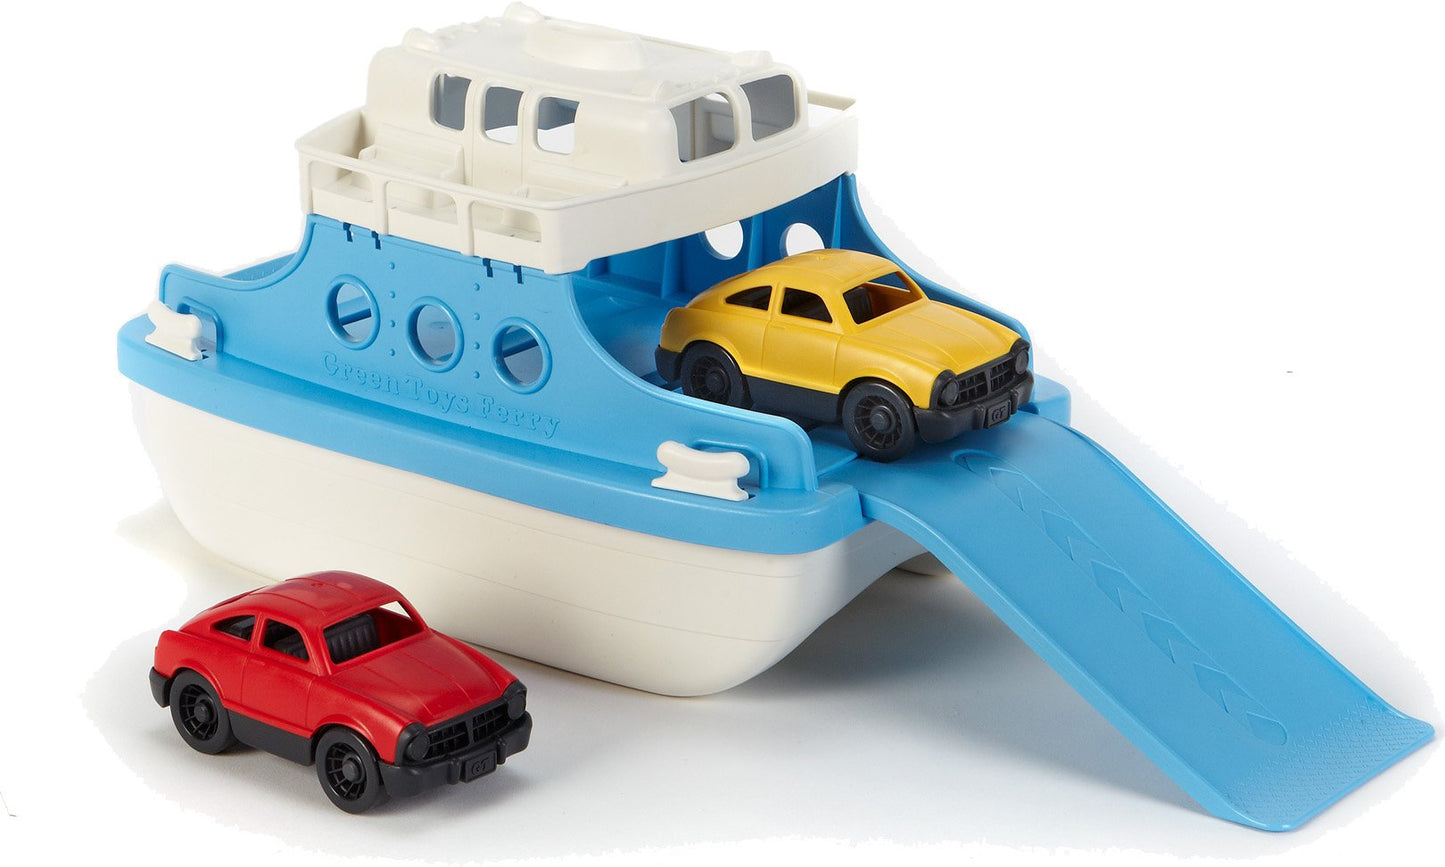 the white top ferry boat and two cars on a white background